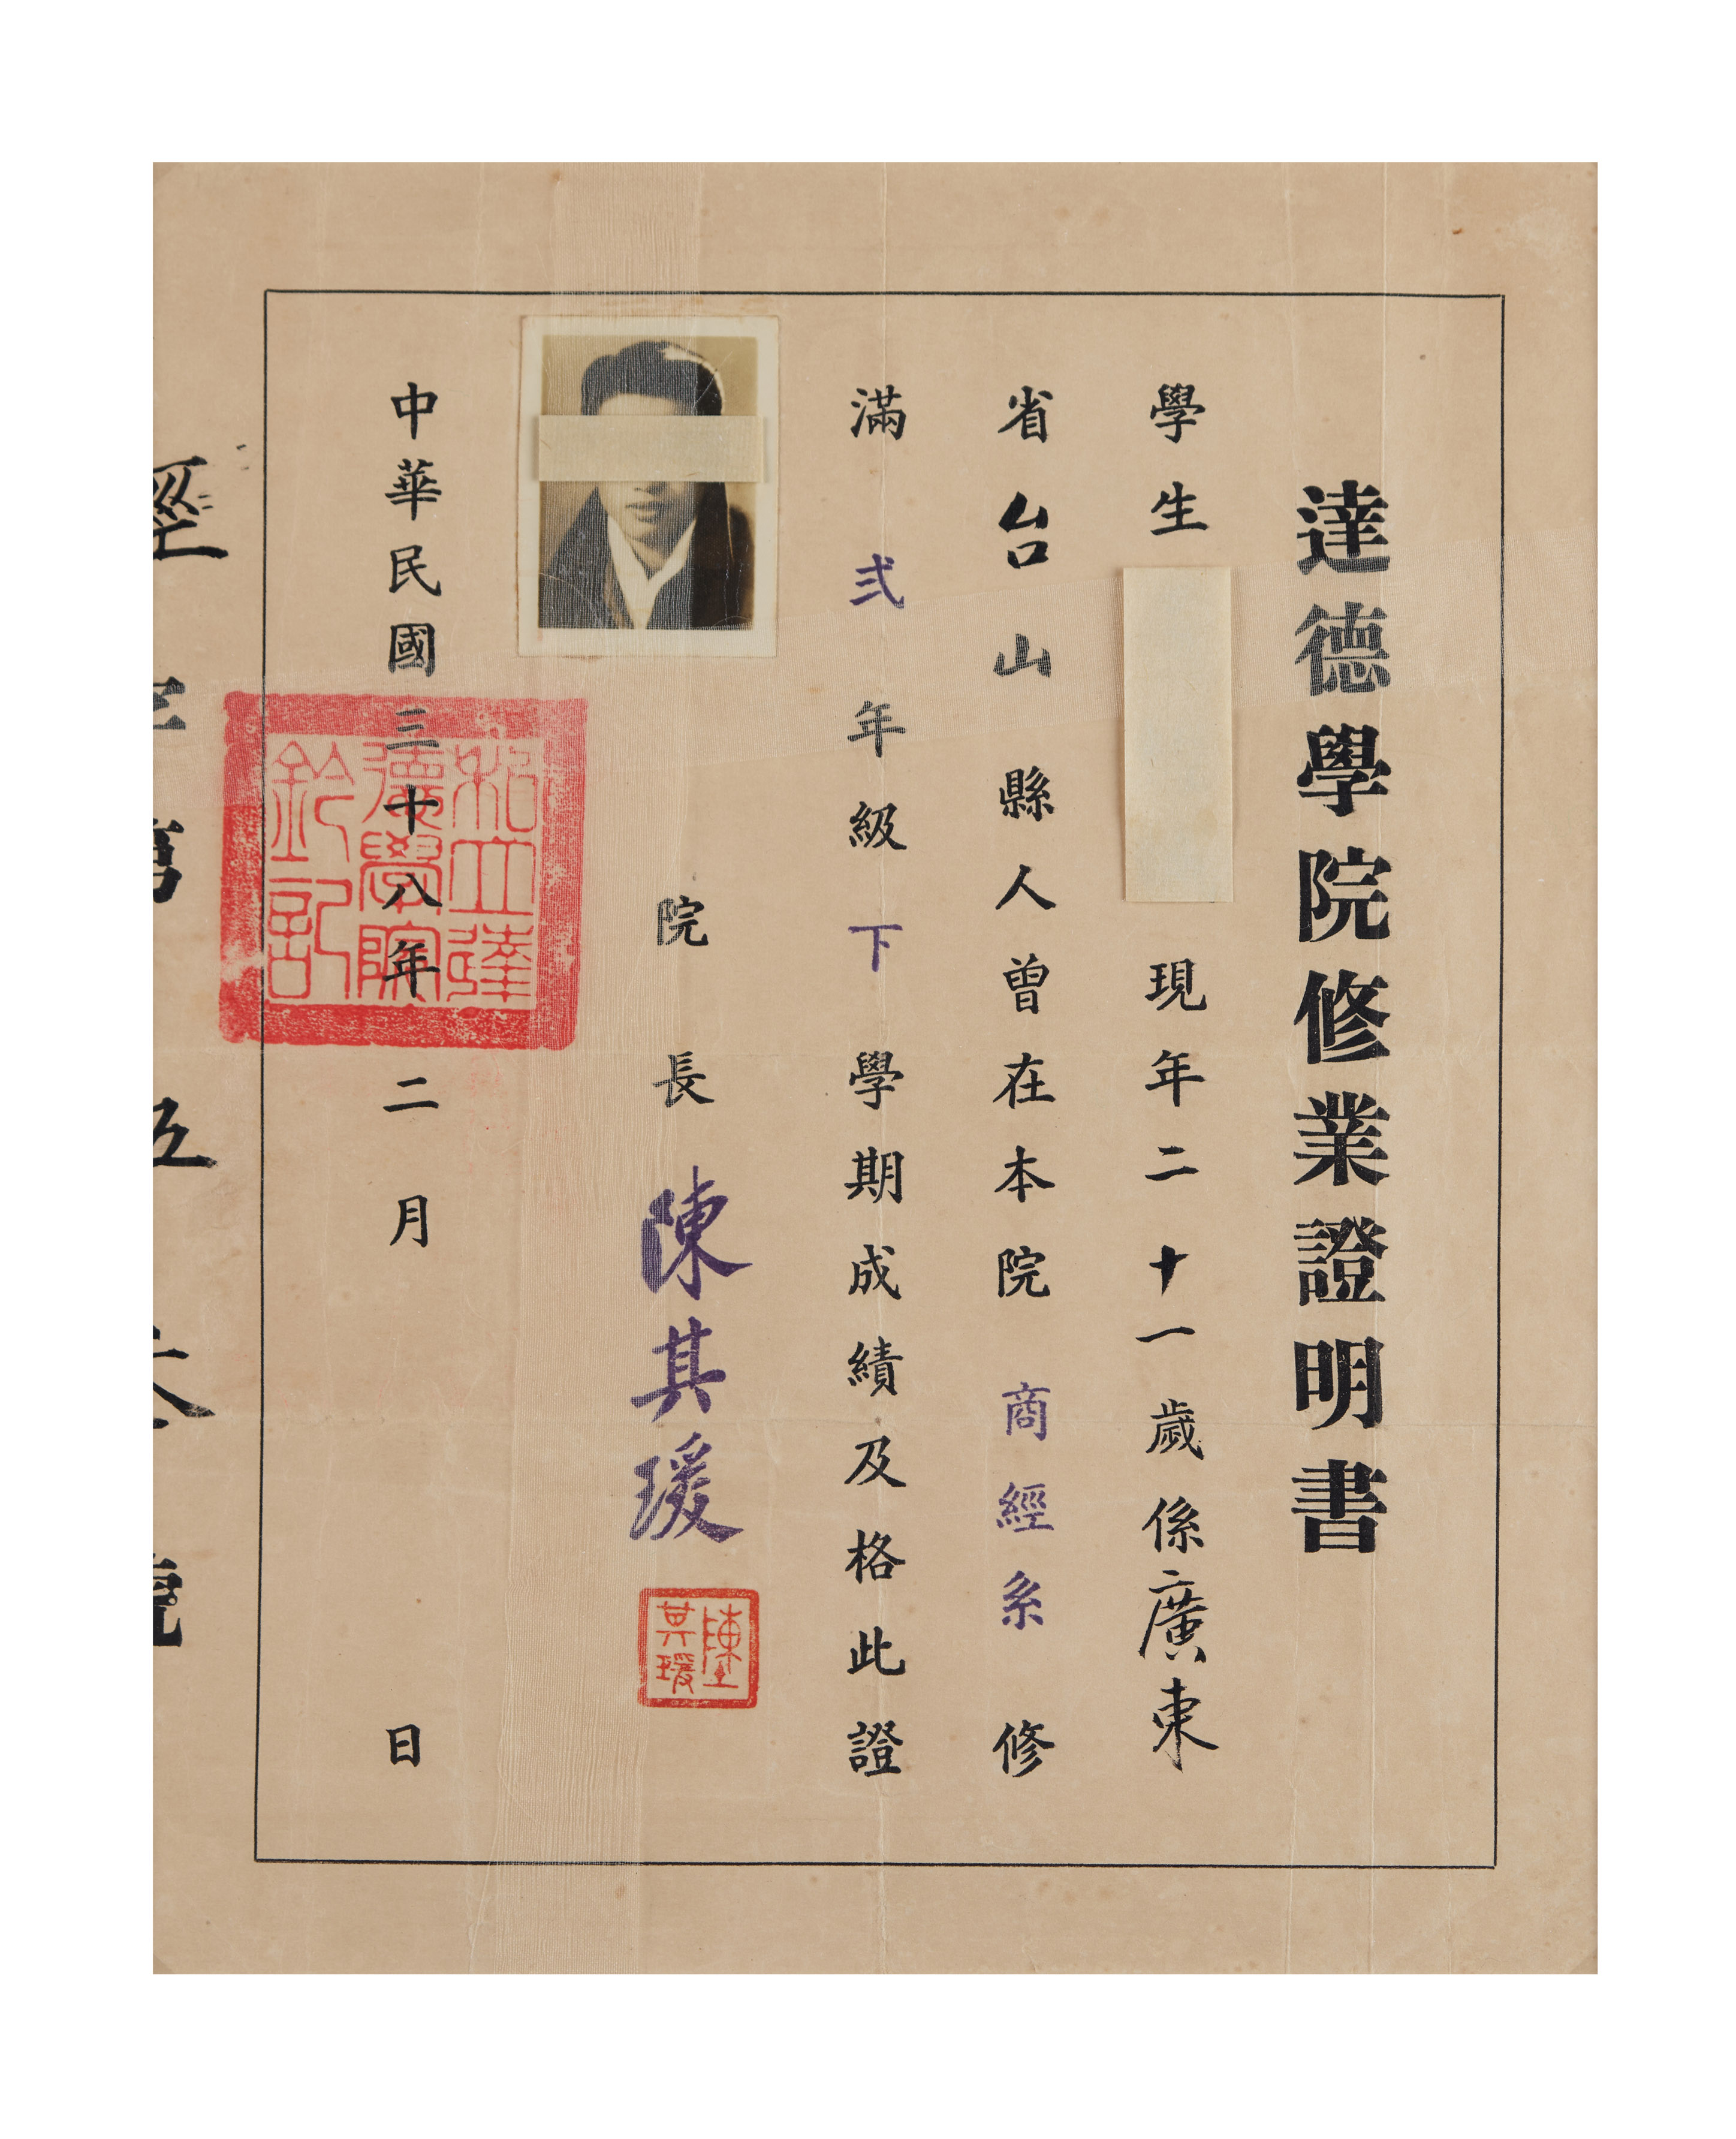 Certificate of Completion of Studies at the Ta Teh Institute. Courtesy of Hong Kong Museum of History.